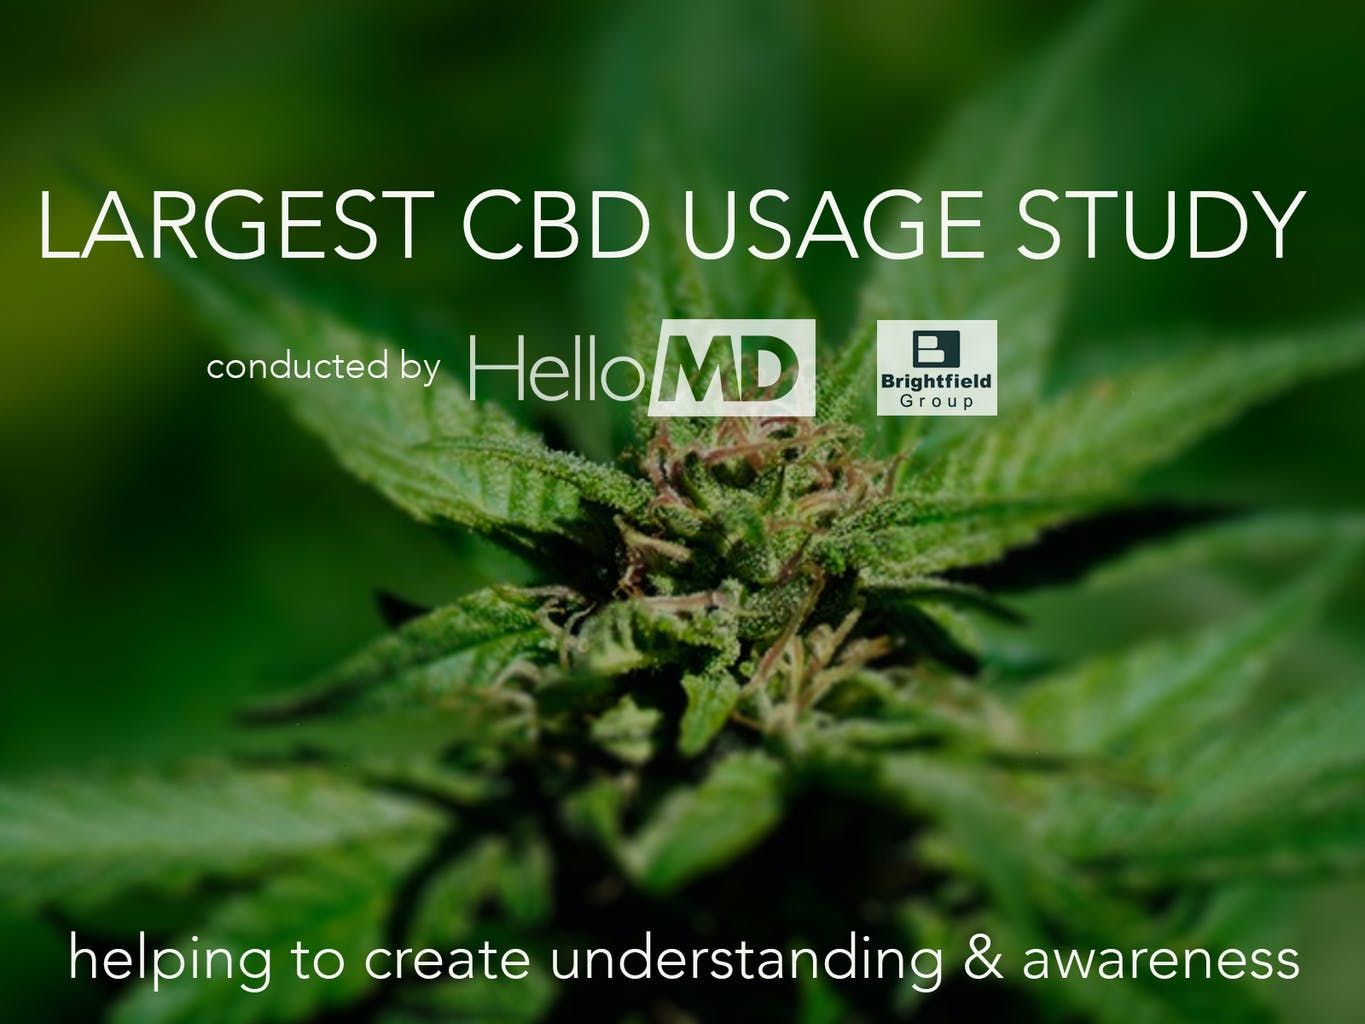 largest_cbd_usage_study_published_by_hellomd_with_brightfield_group_ead621298e